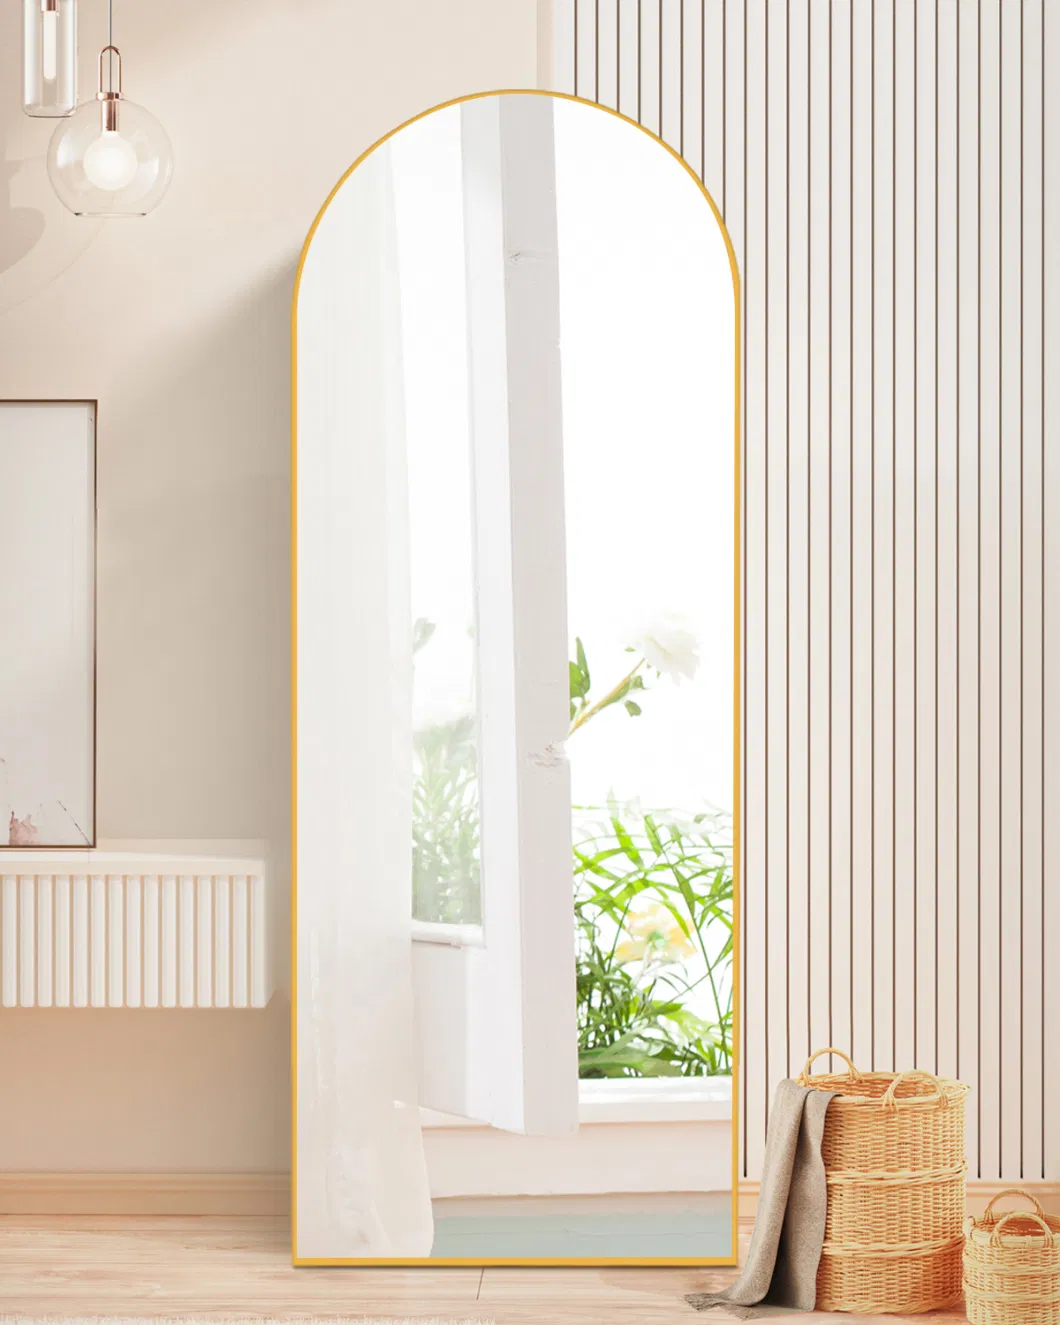 Arched Top Wall Decorative Floor Standing Derssing Full Body Length Wall Mounted Mirror 163*54cm